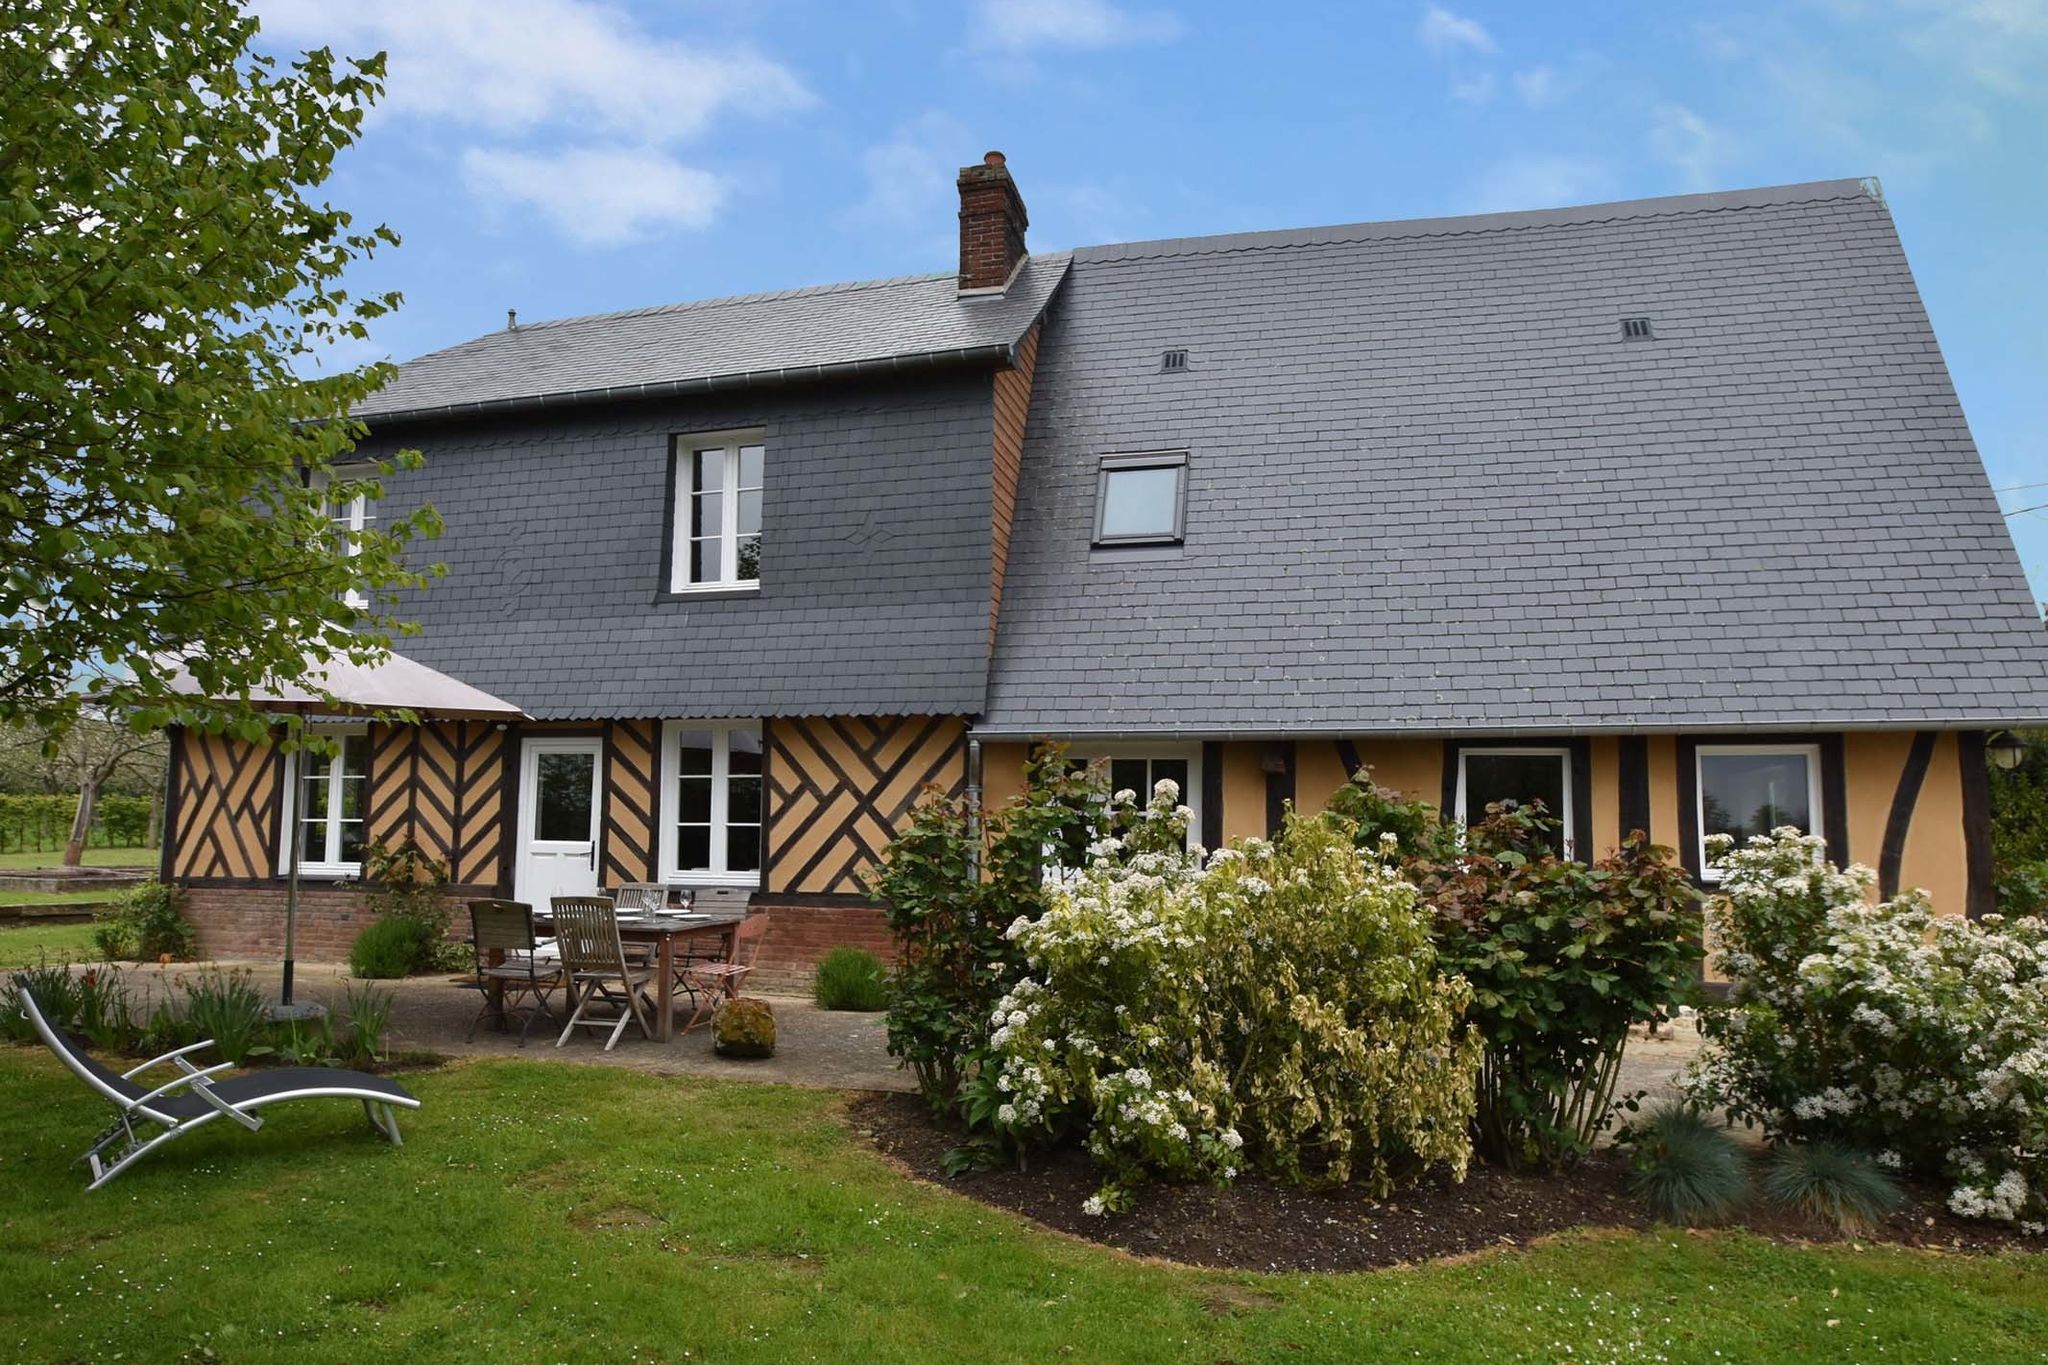 Stunning Normandy holiday home with large garden in peaceful setting